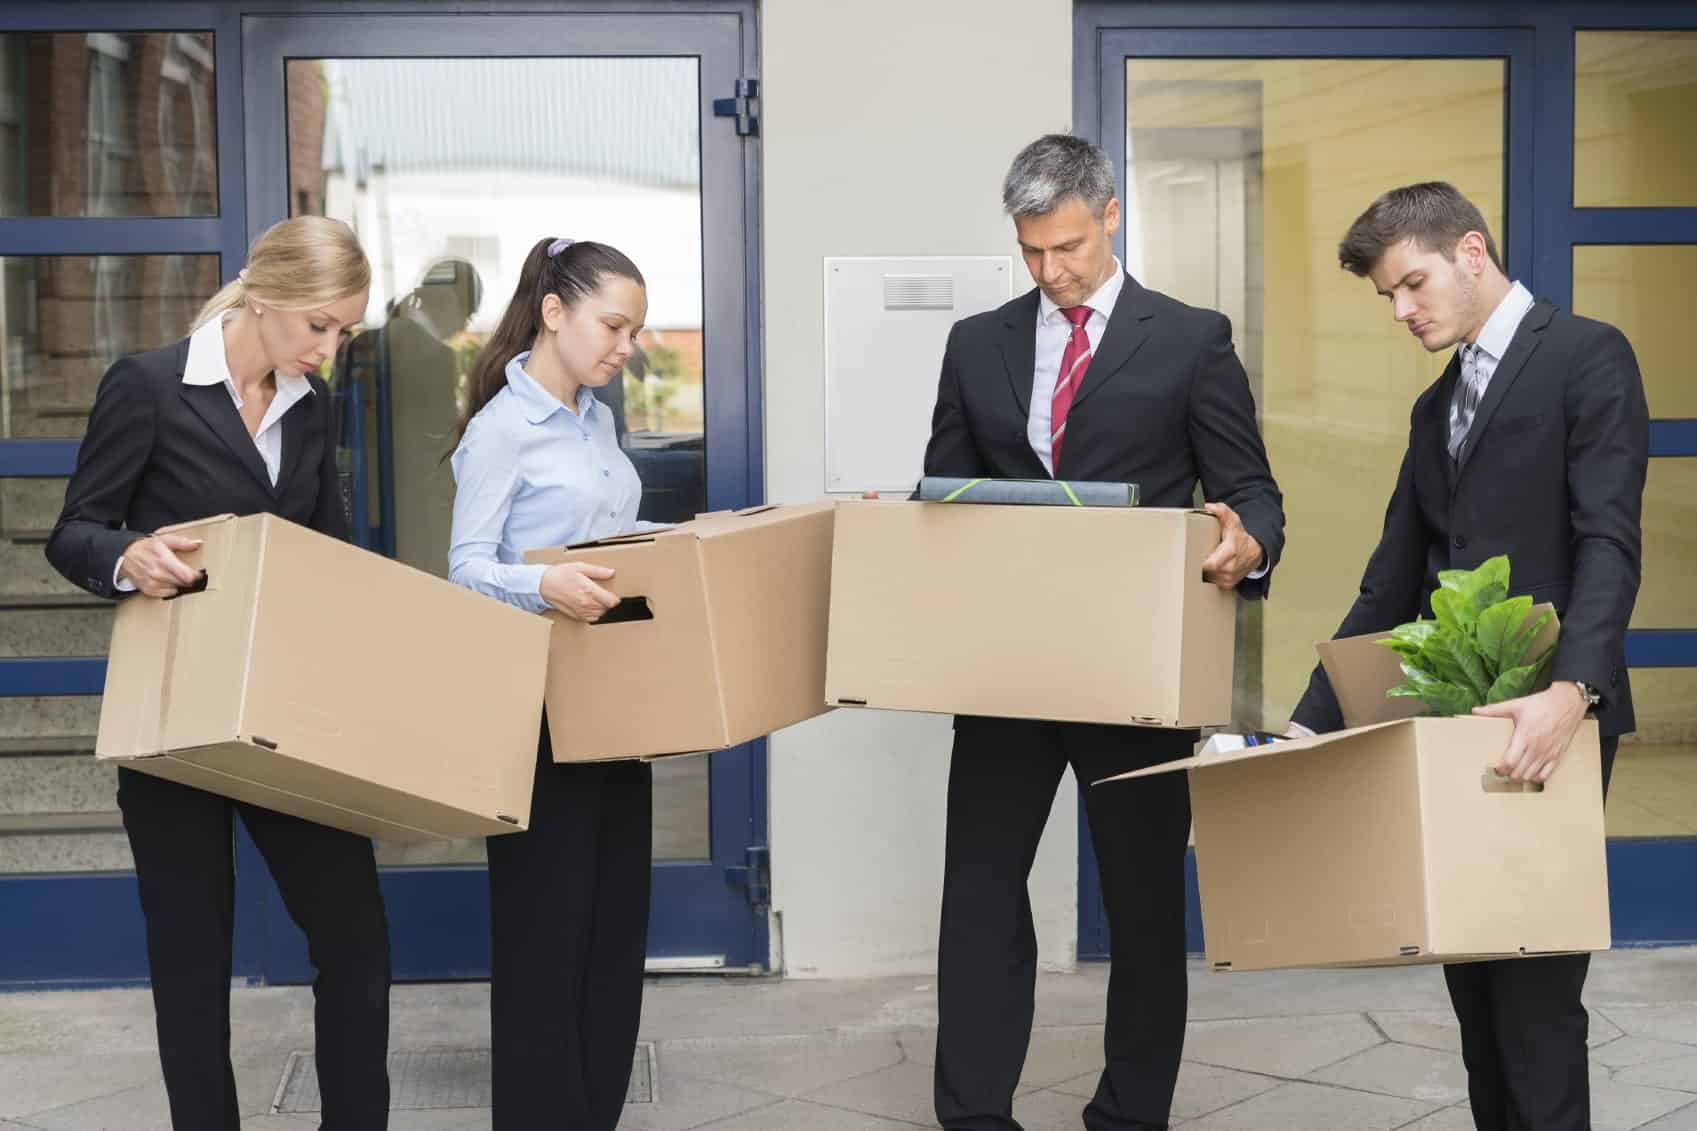 5 Ways To Reduce Employee Turnover In The First Few Months of Hiring